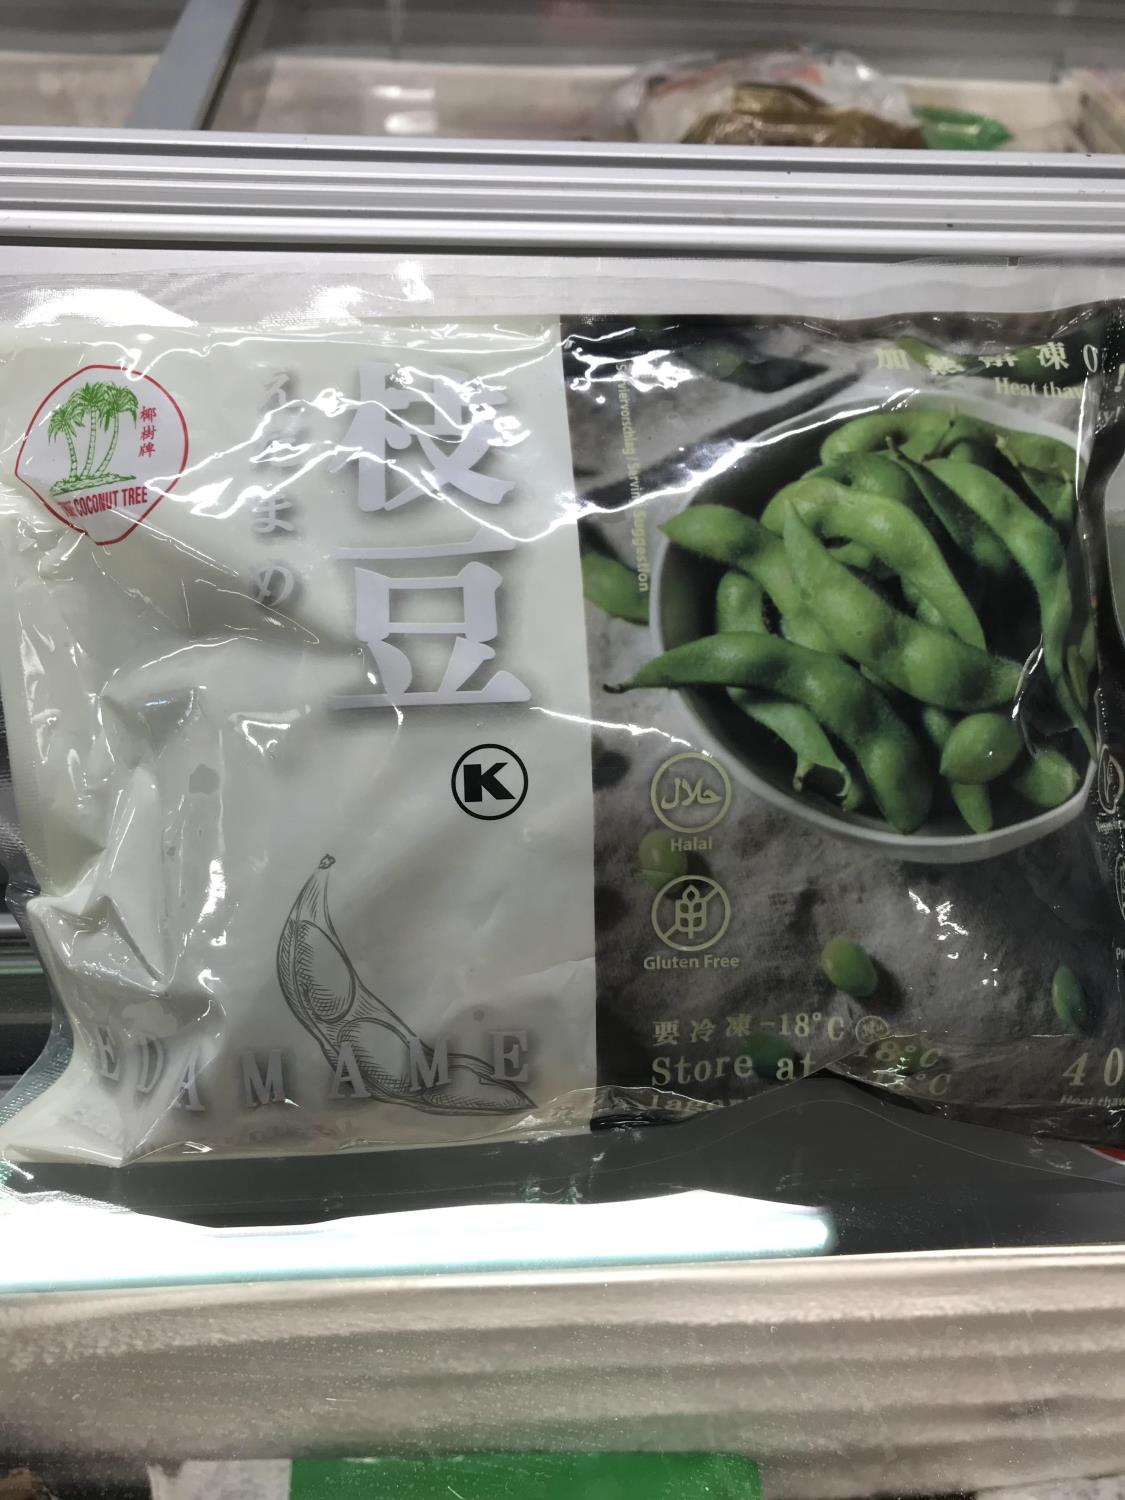 Edamame with shell, 400g 带壳枝豆 400克